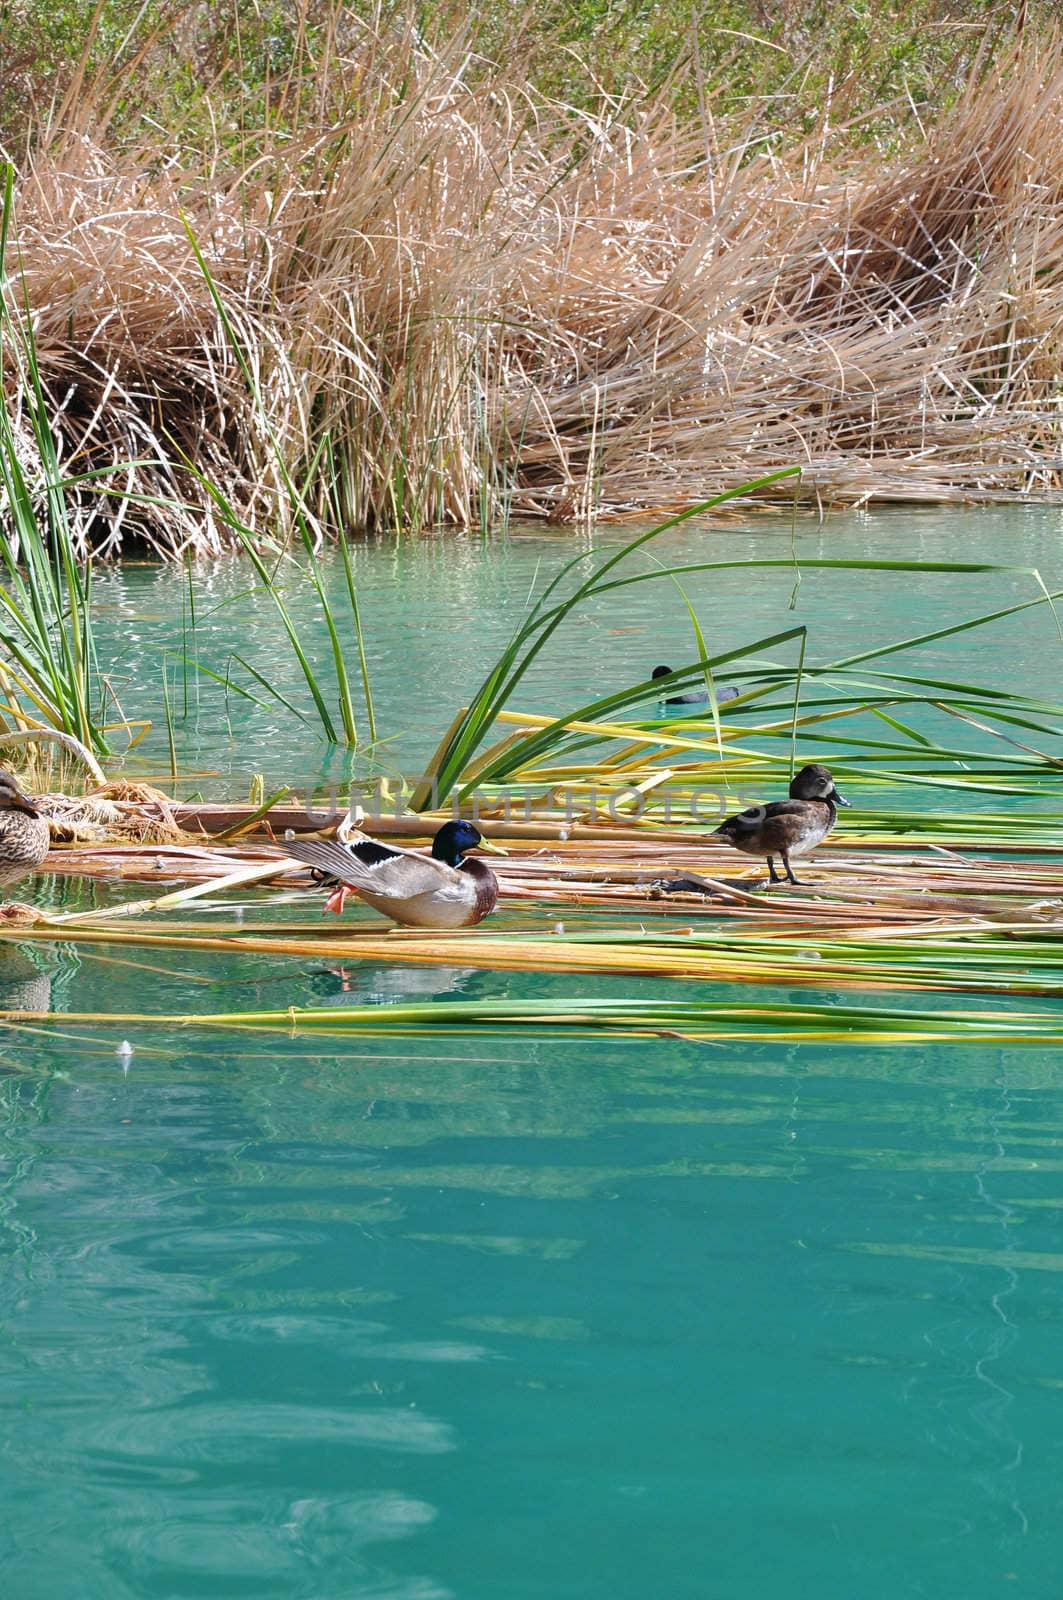 A few ducks seek rest among the shoreline reeds at a pond in Whitewater Canyon. Located near the desert town of Palm Springs, California.